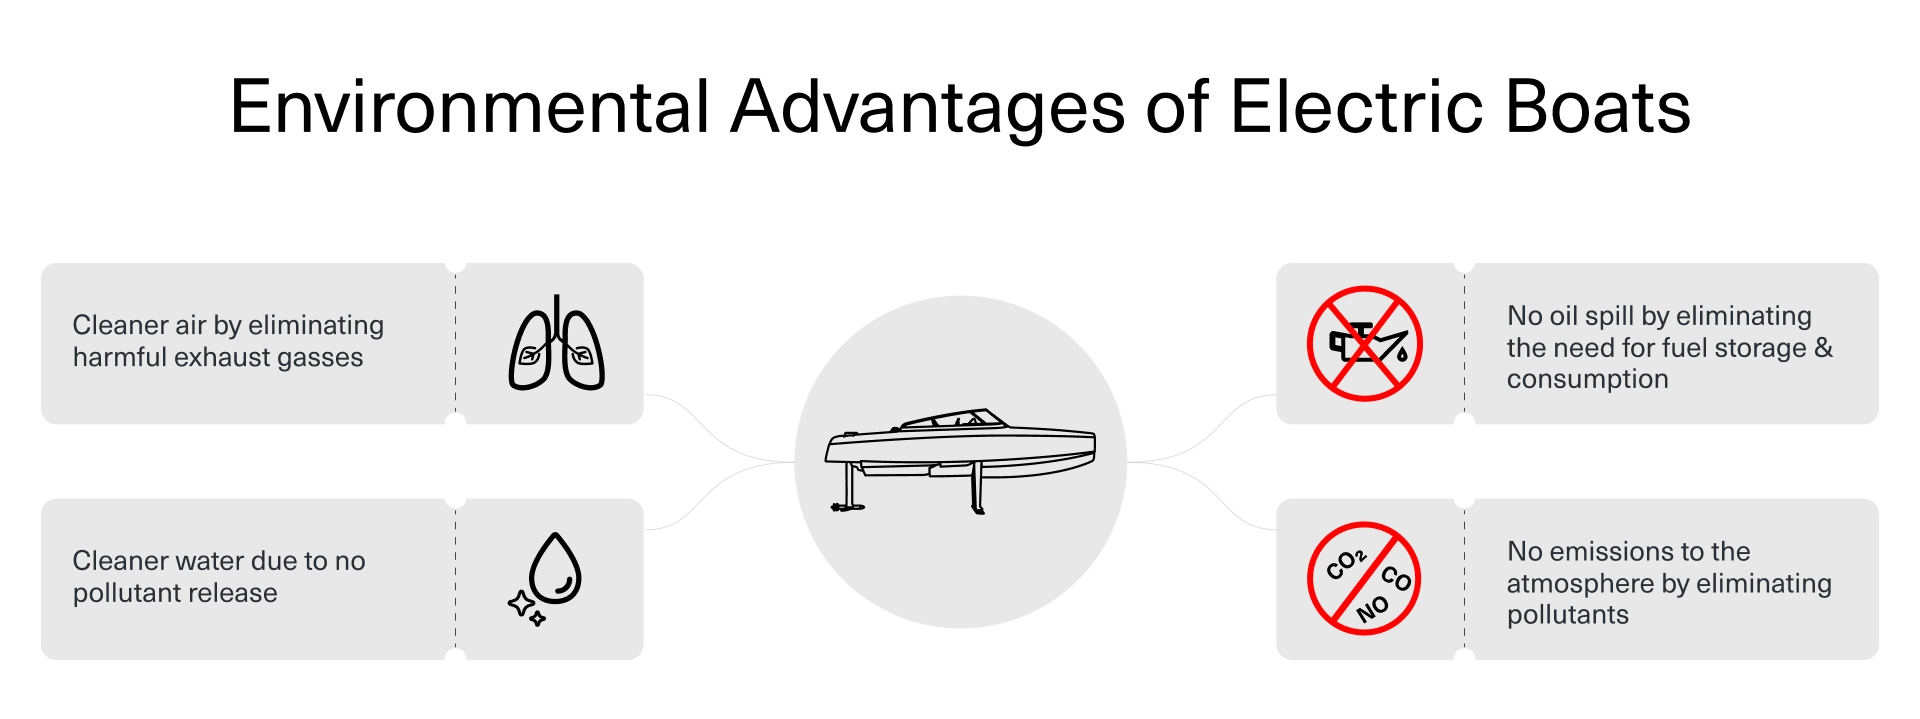 Environmental Advantages of Electric Boats